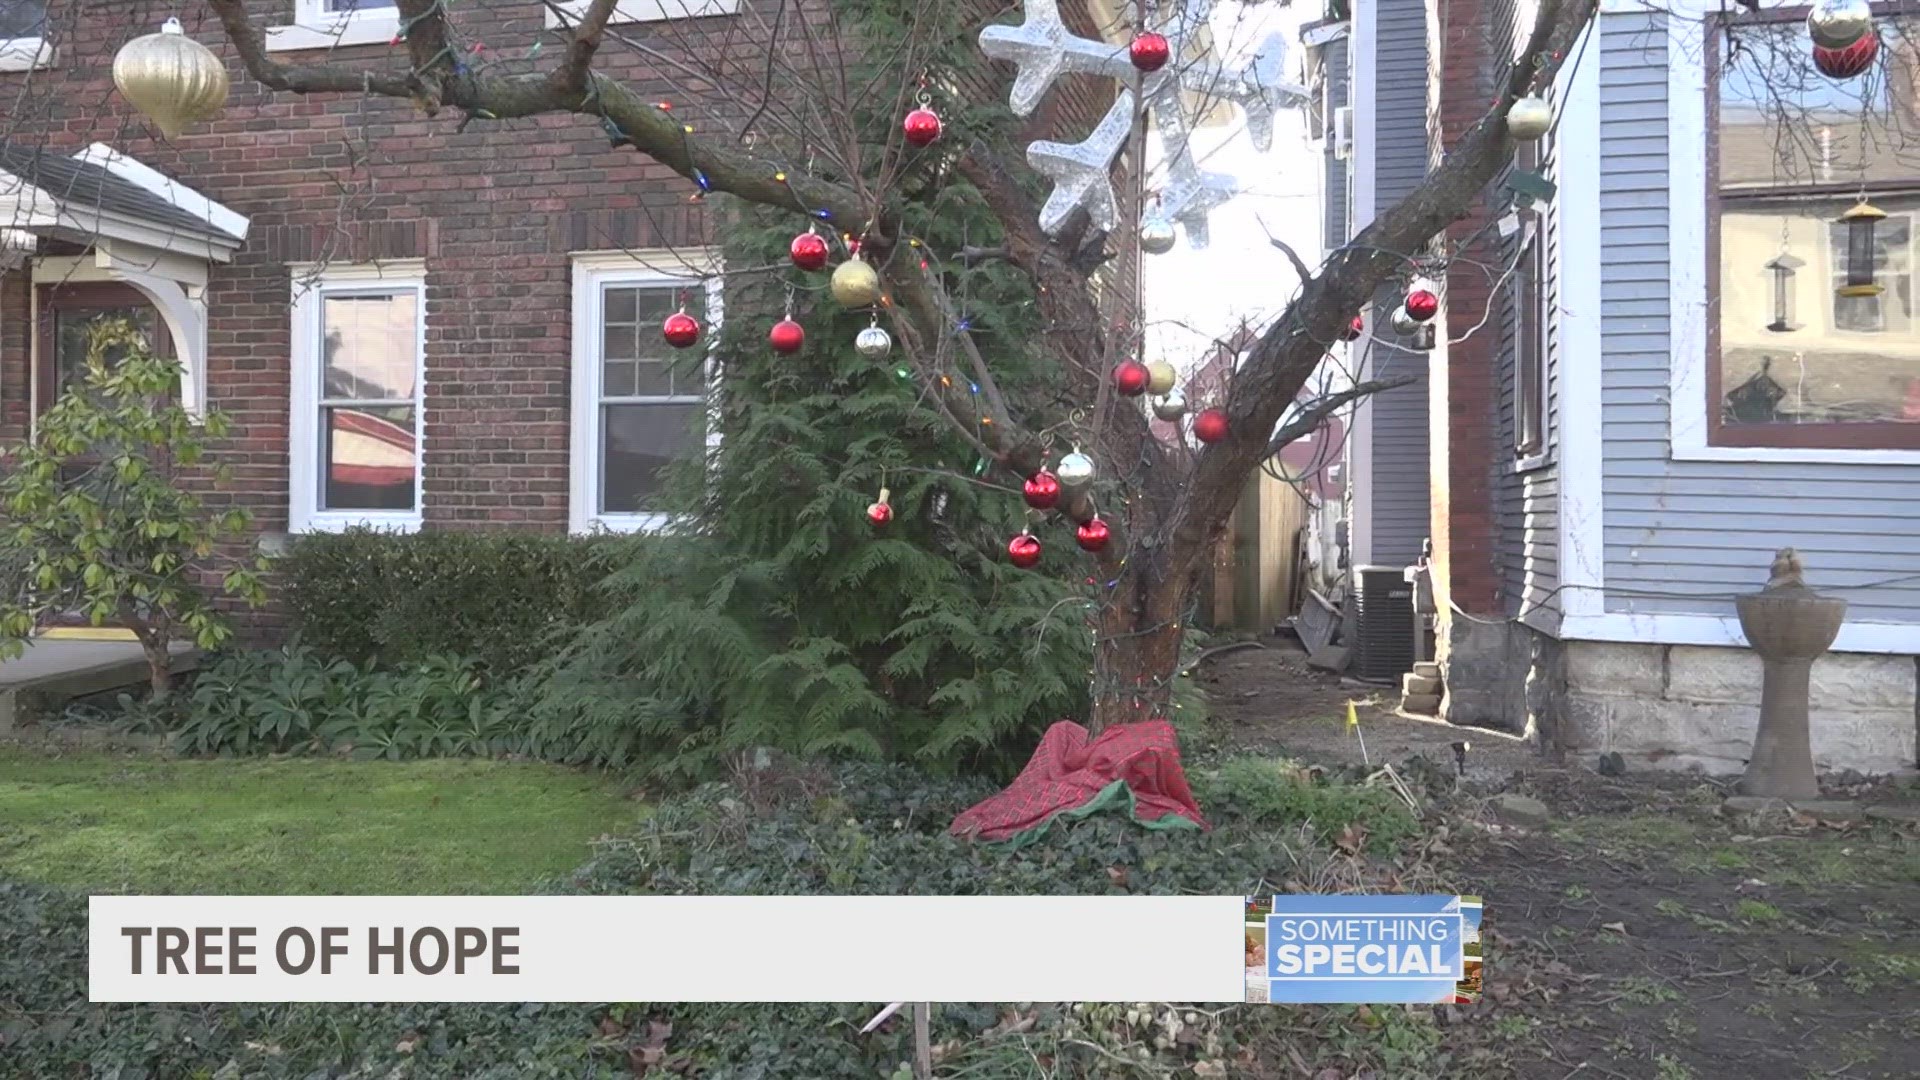 A woman dealing with a hard loss found hope through a dying tree in her front yard — and brought the whole neighborhood together in the process.